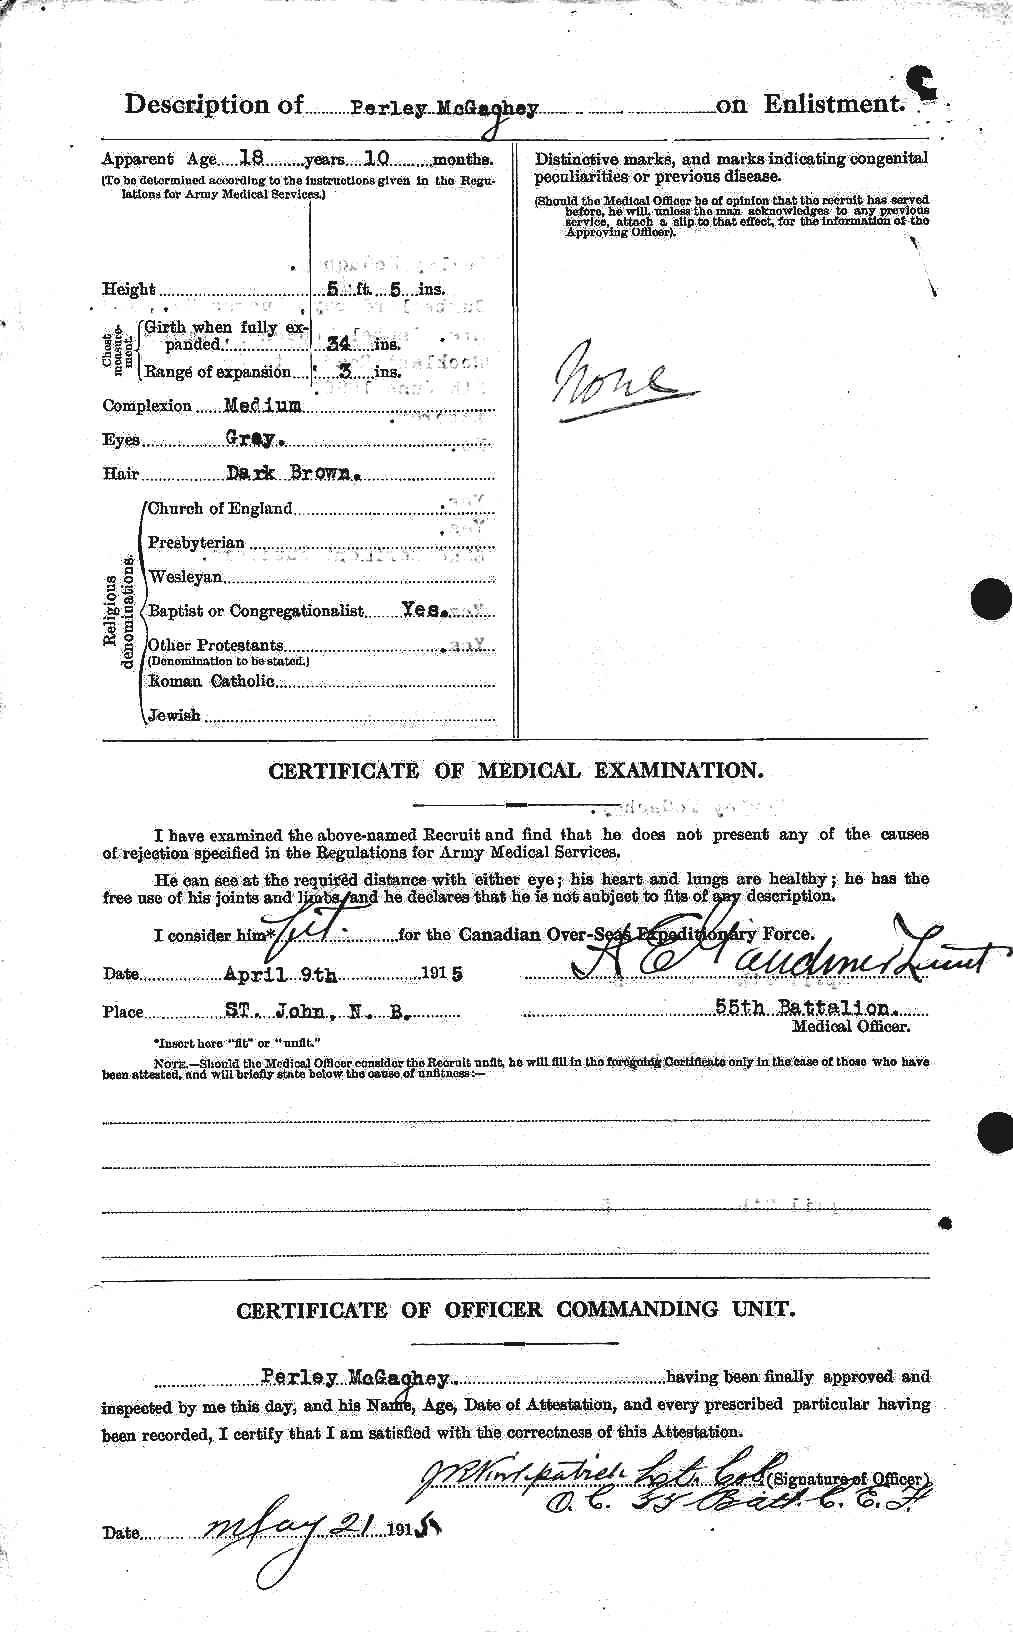 Personnel Records of the First World War - CEF 522648b